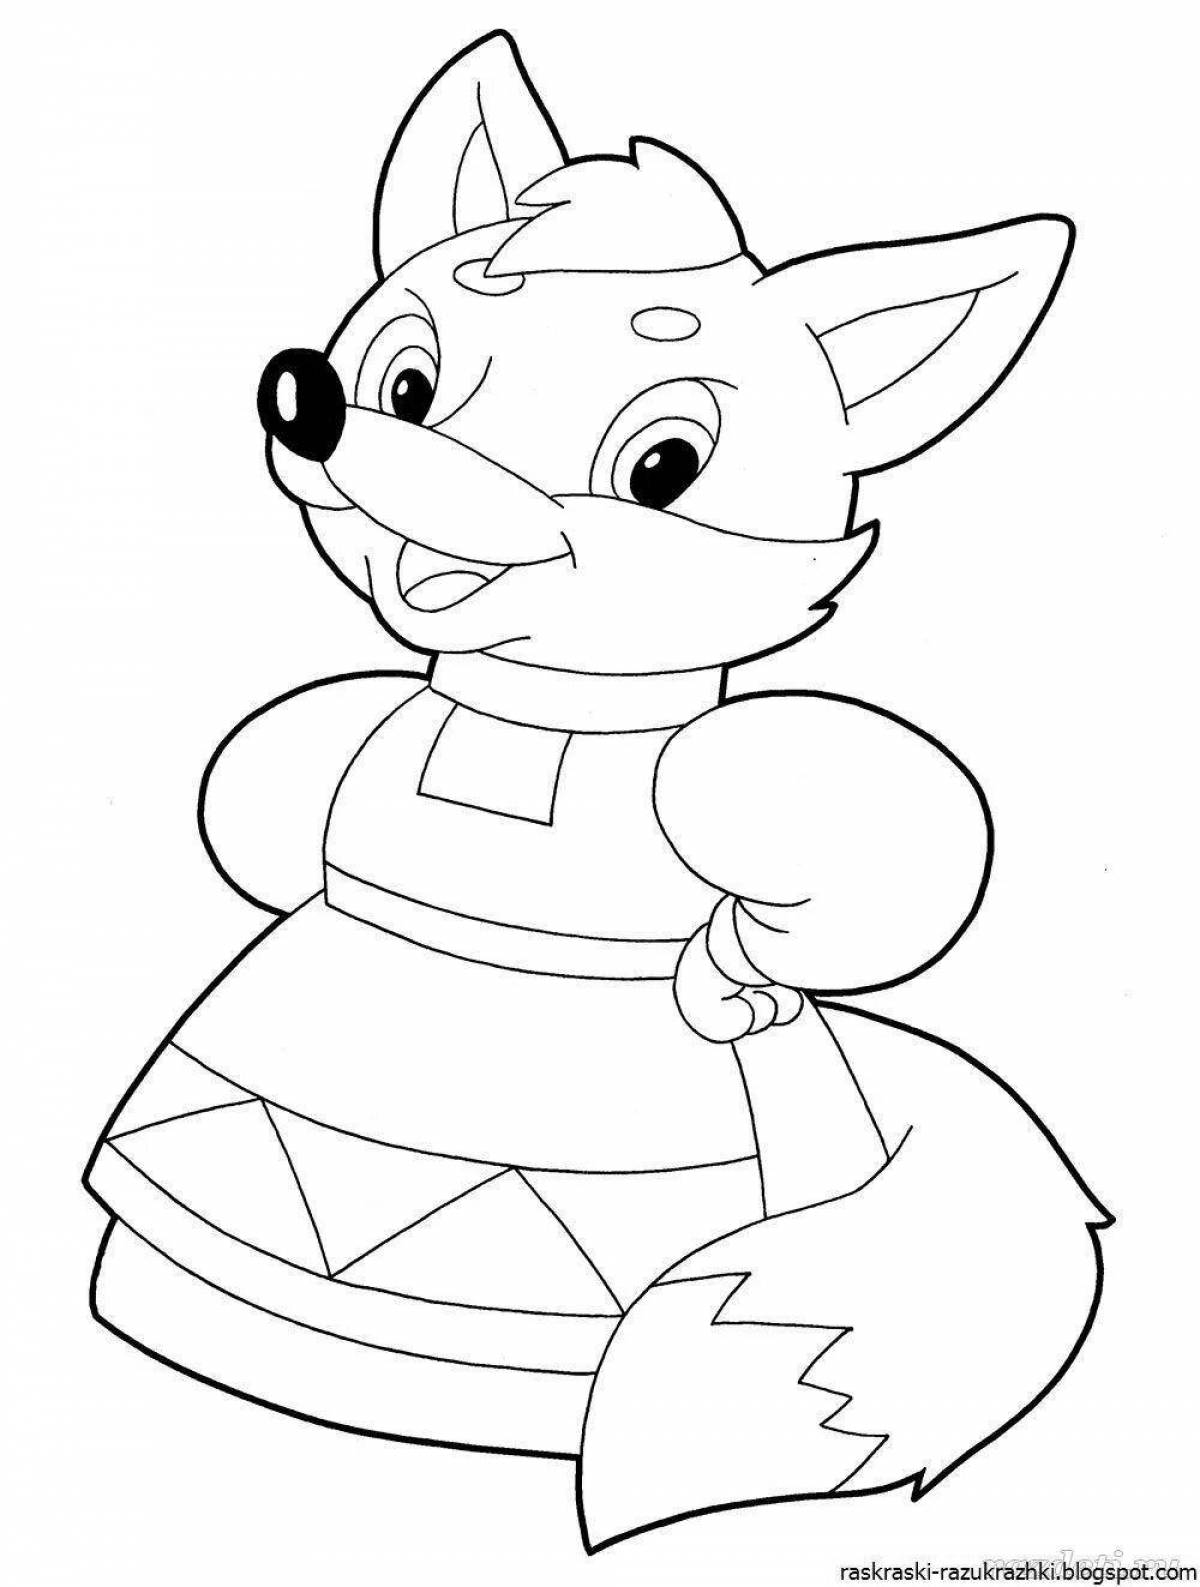 Live coloring fox for children 4-5 years old